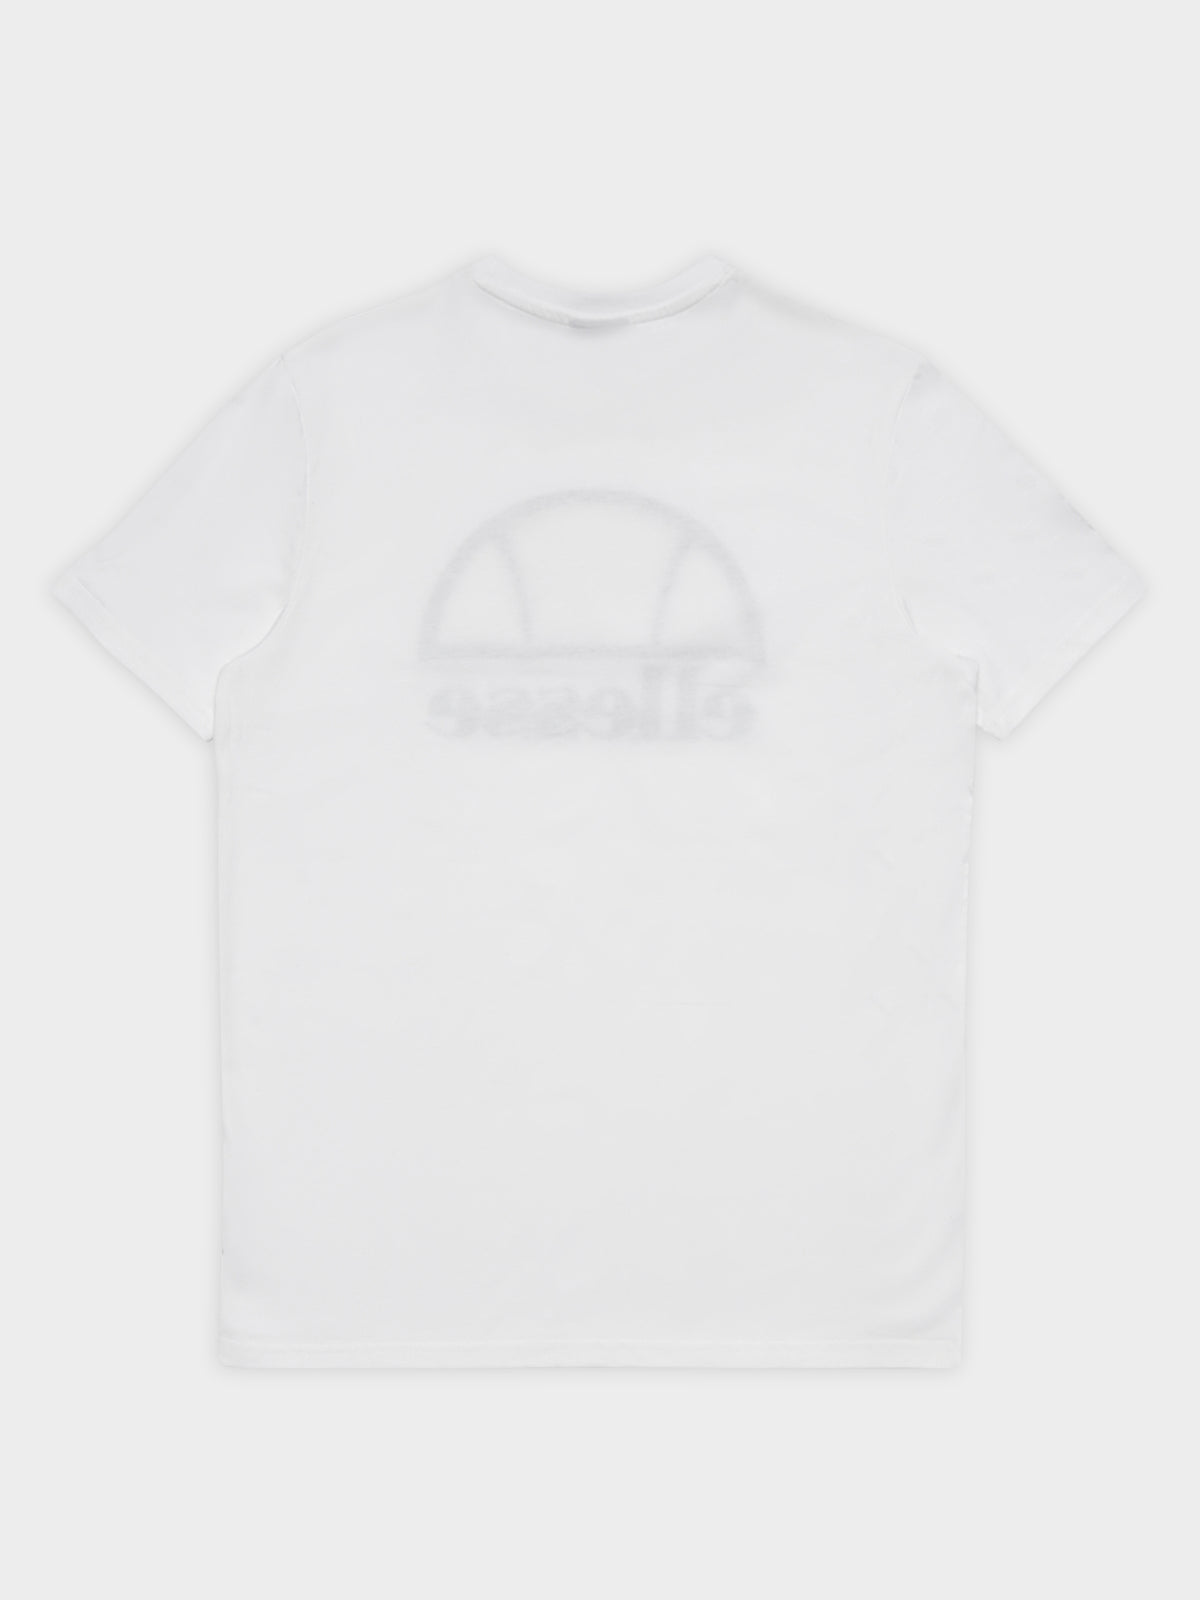 Quil T-Shirt in White